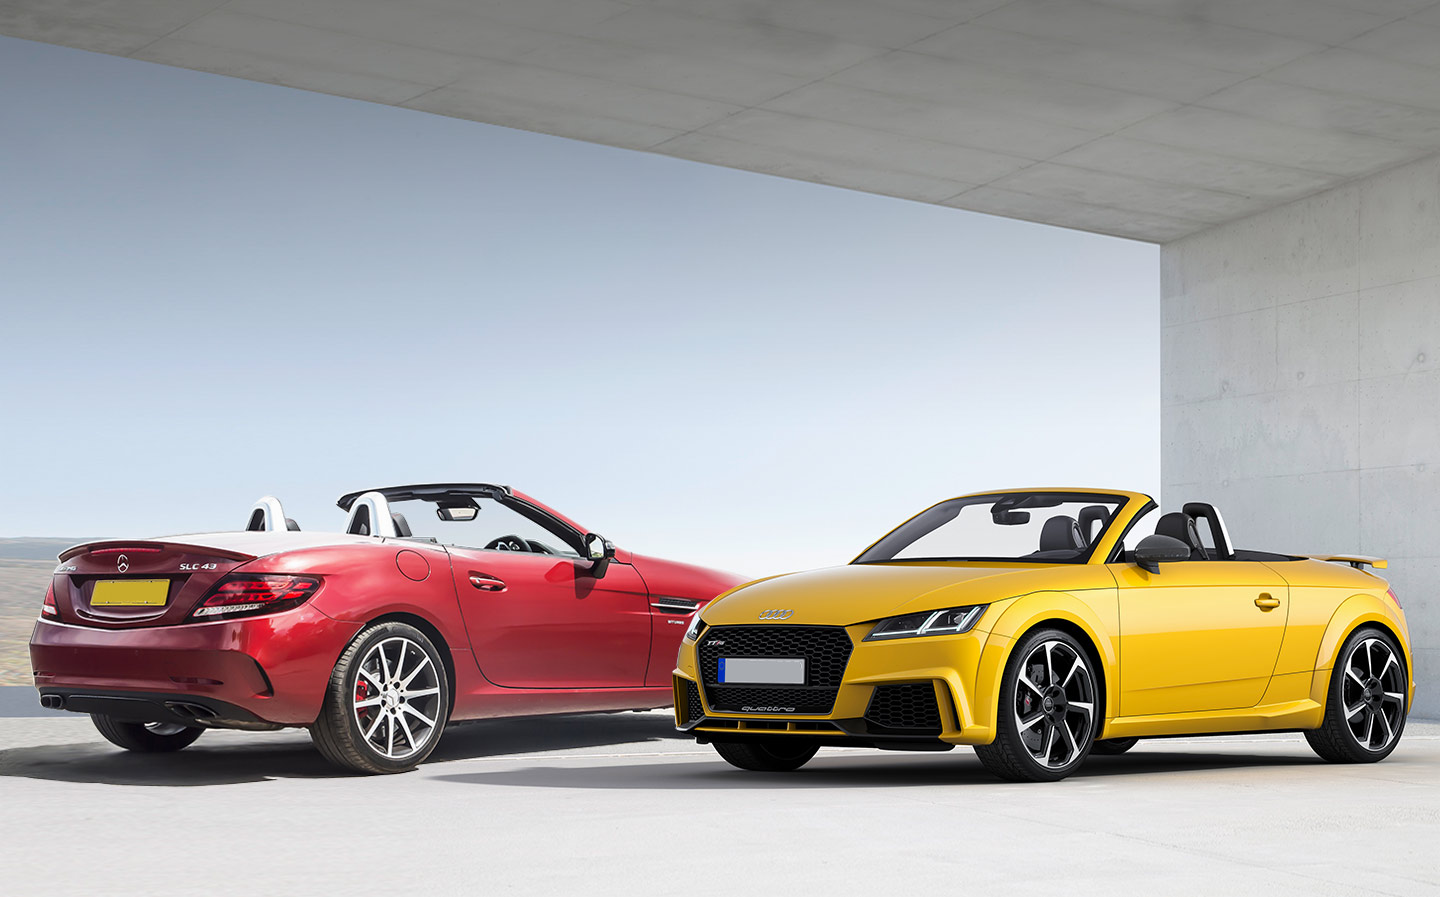 Drop the top and show some muscle: Audi TT RS v Mercedes-AMG SLC 43